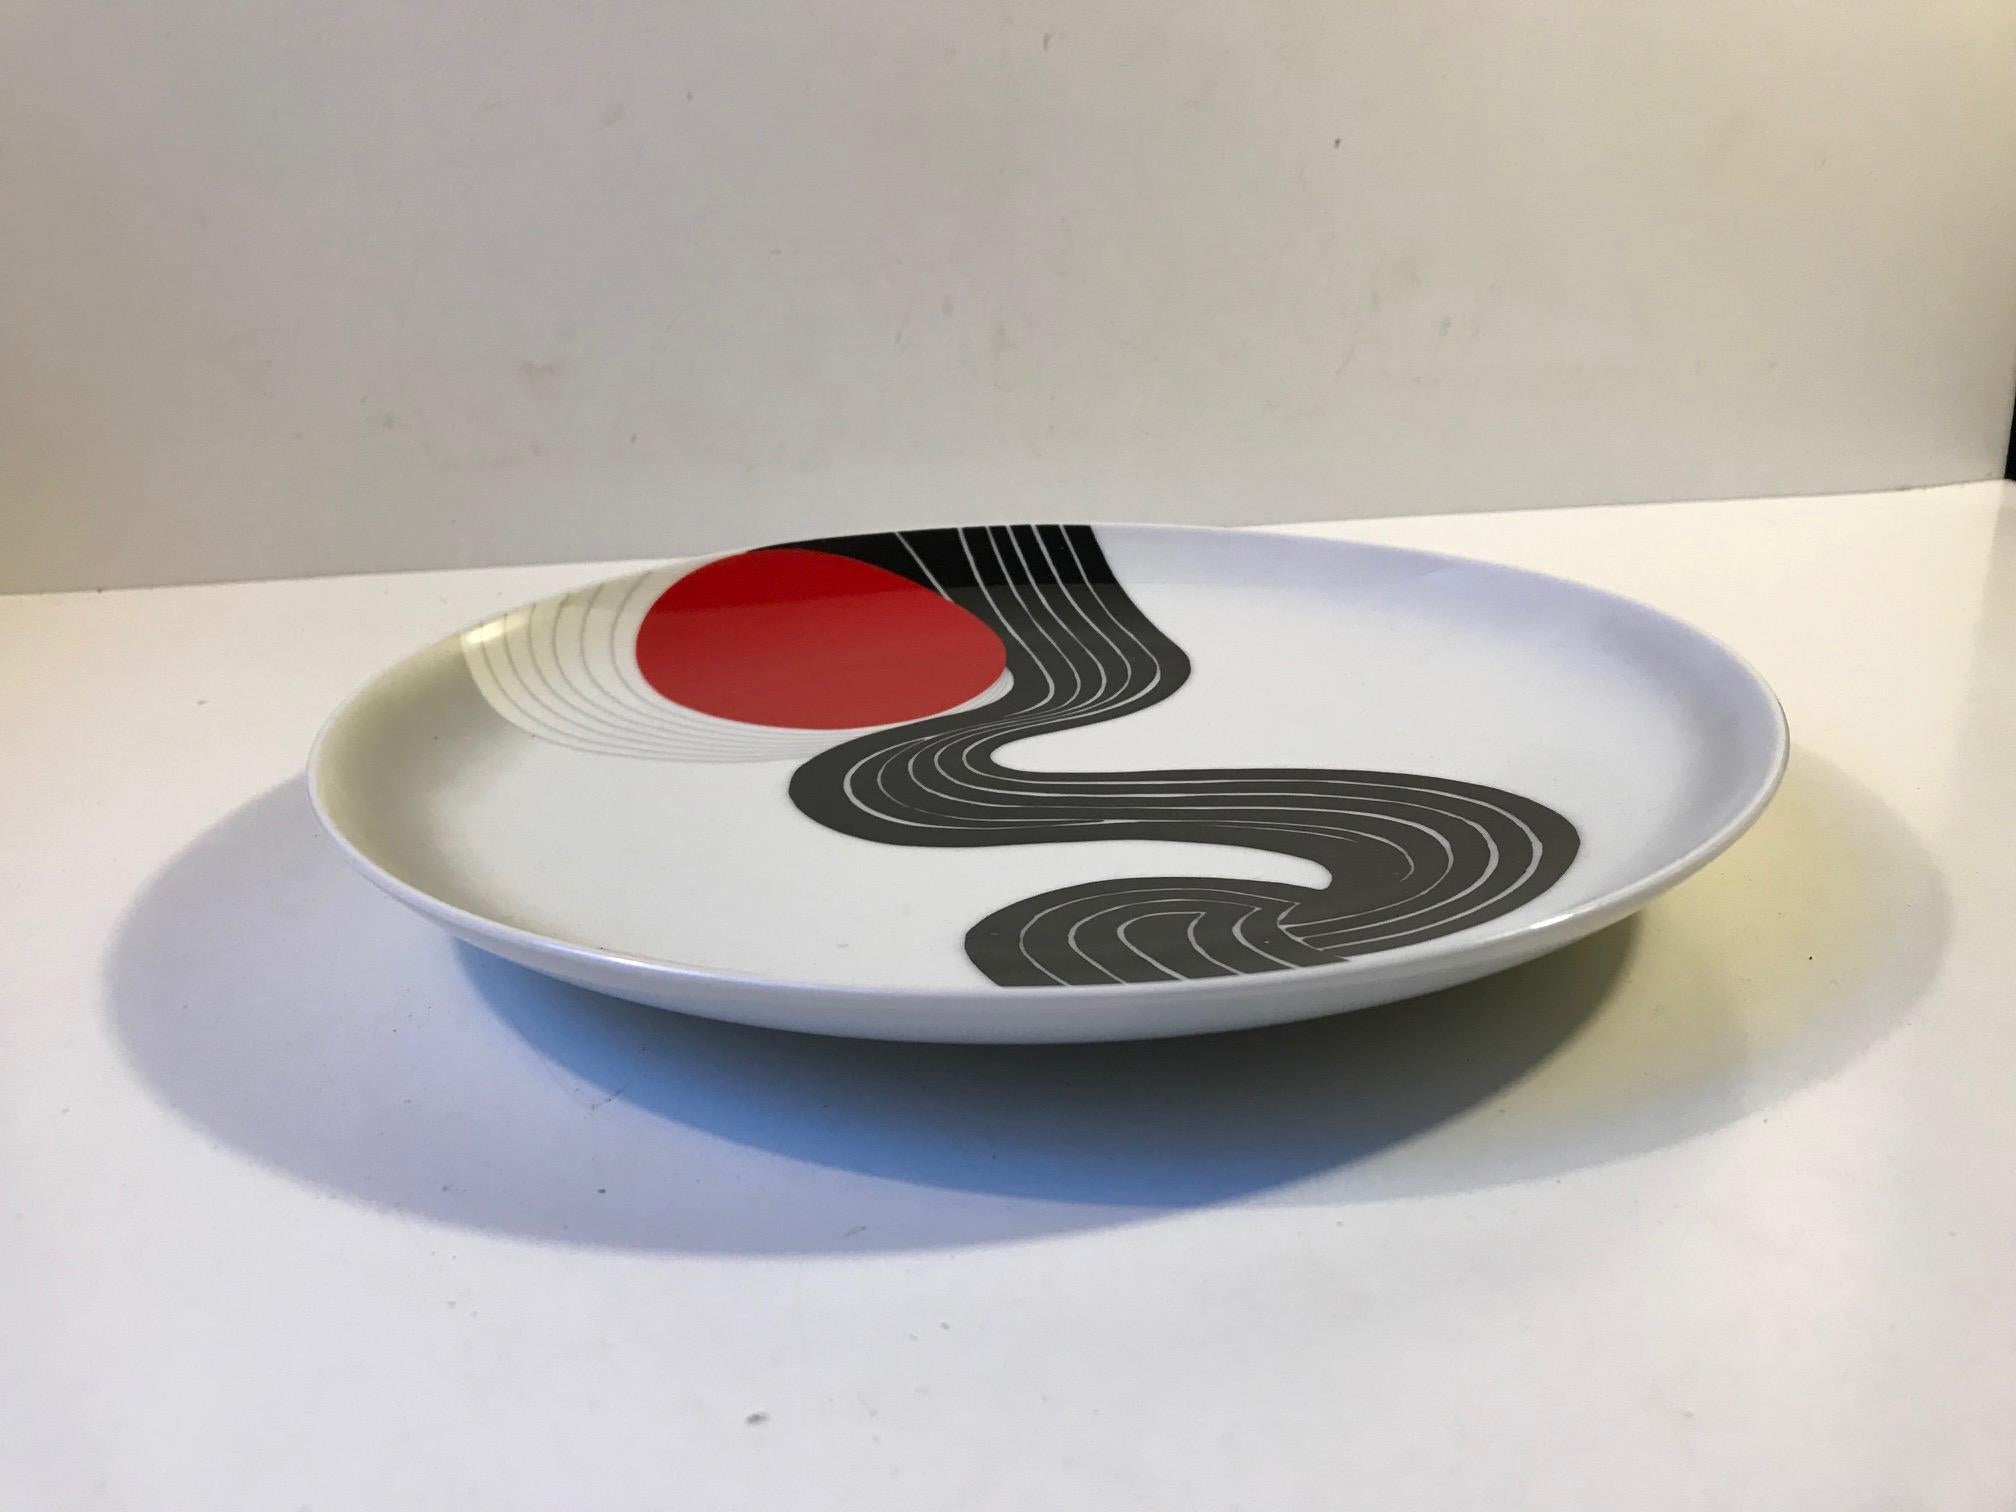 Wall hung porcelain plaque or dish with motif designed by Indian Graphic designer and artist Srivastava Narendra. This plaque is a part of a 600 pieces limited run by German Rosenthal in 1979.